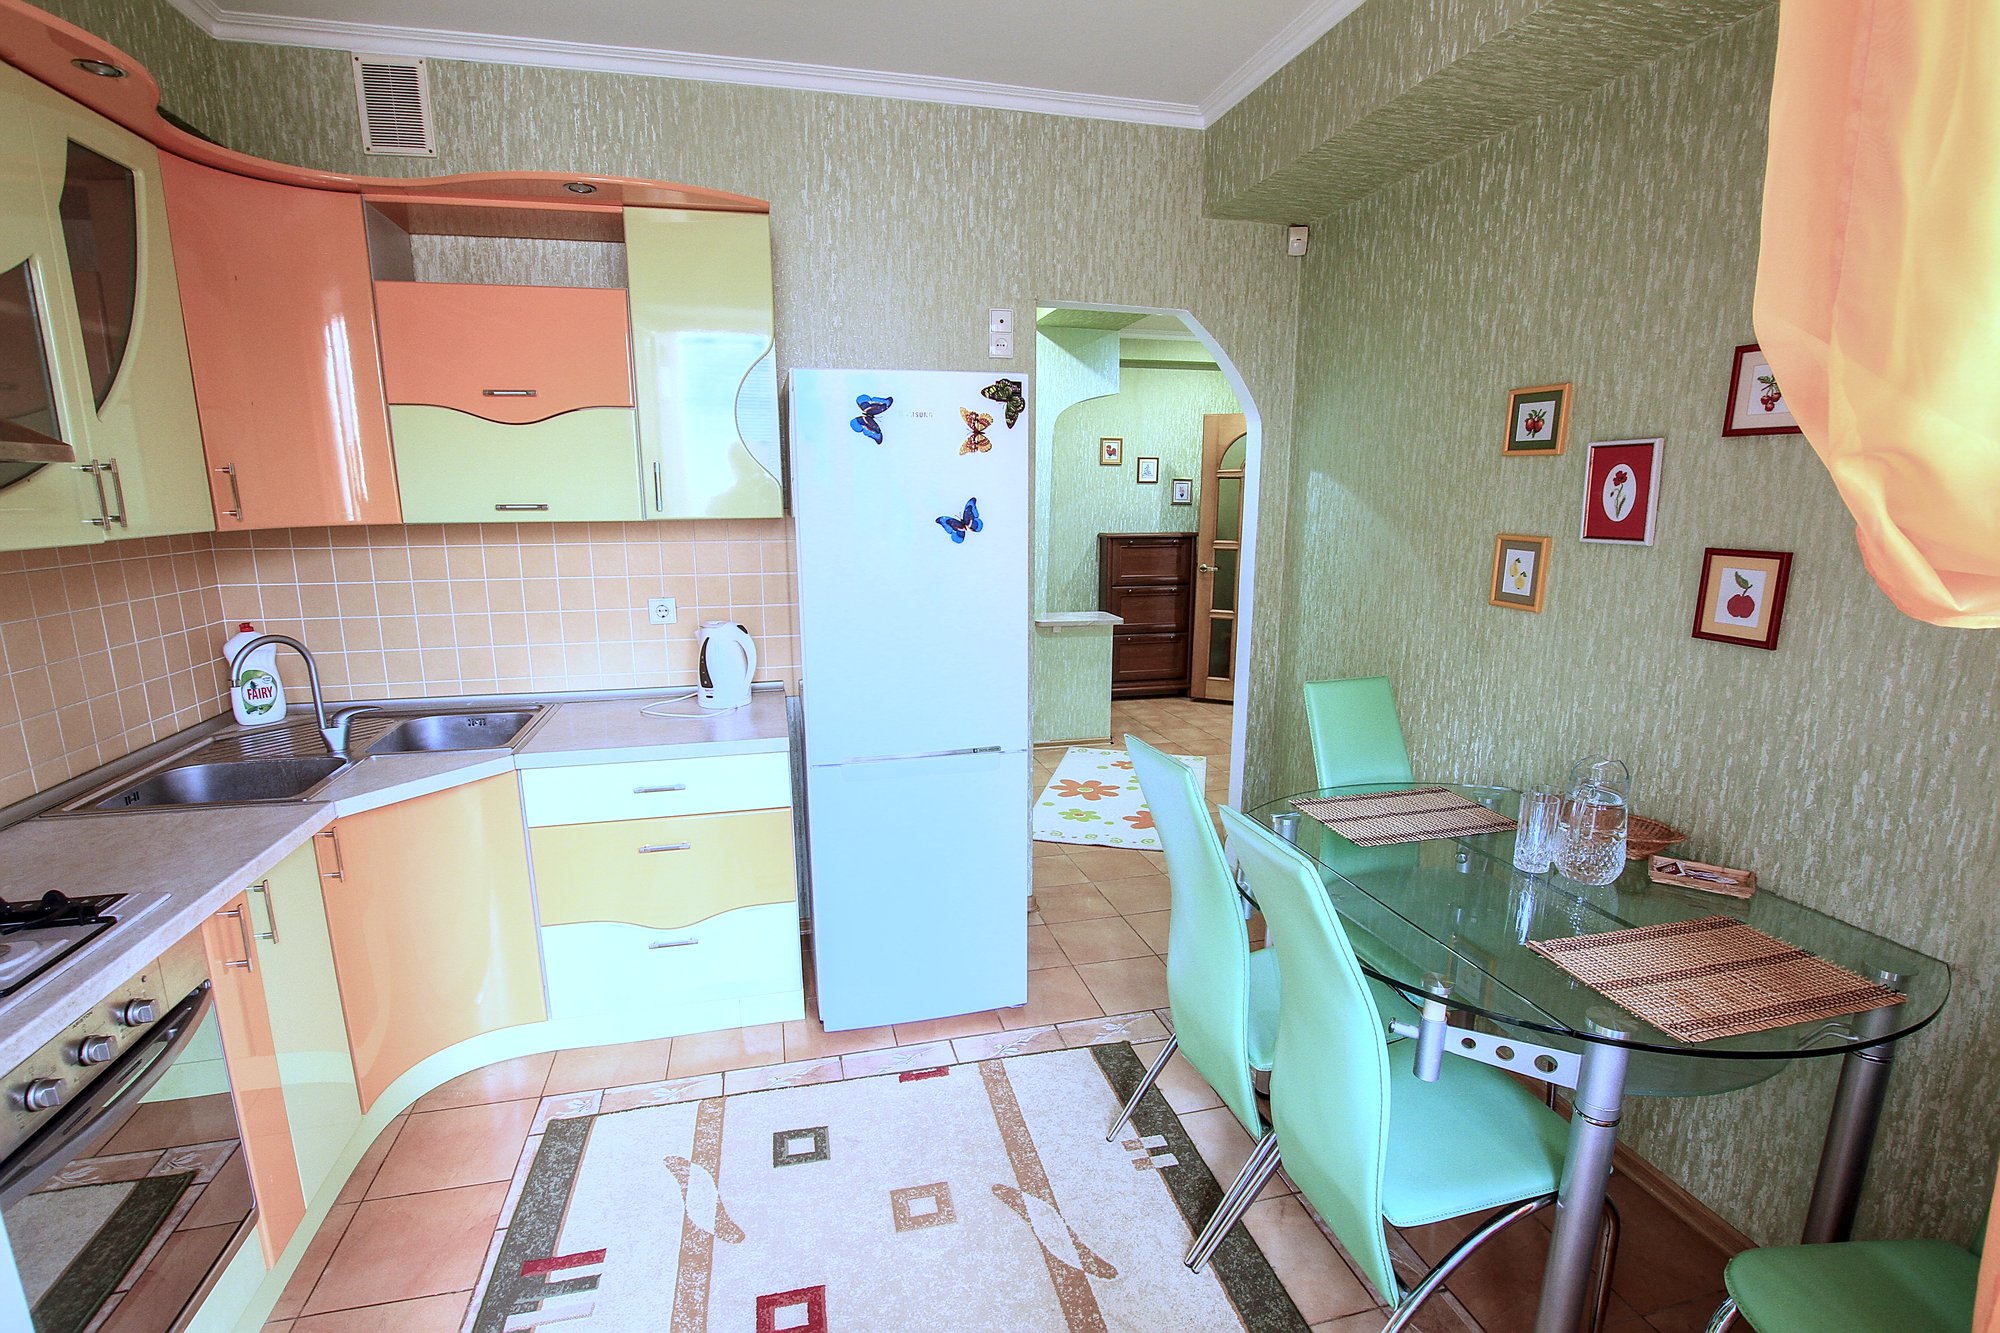 Rent a studio with a flowered terrace: 1 room, 1 bedroom, 53 m²